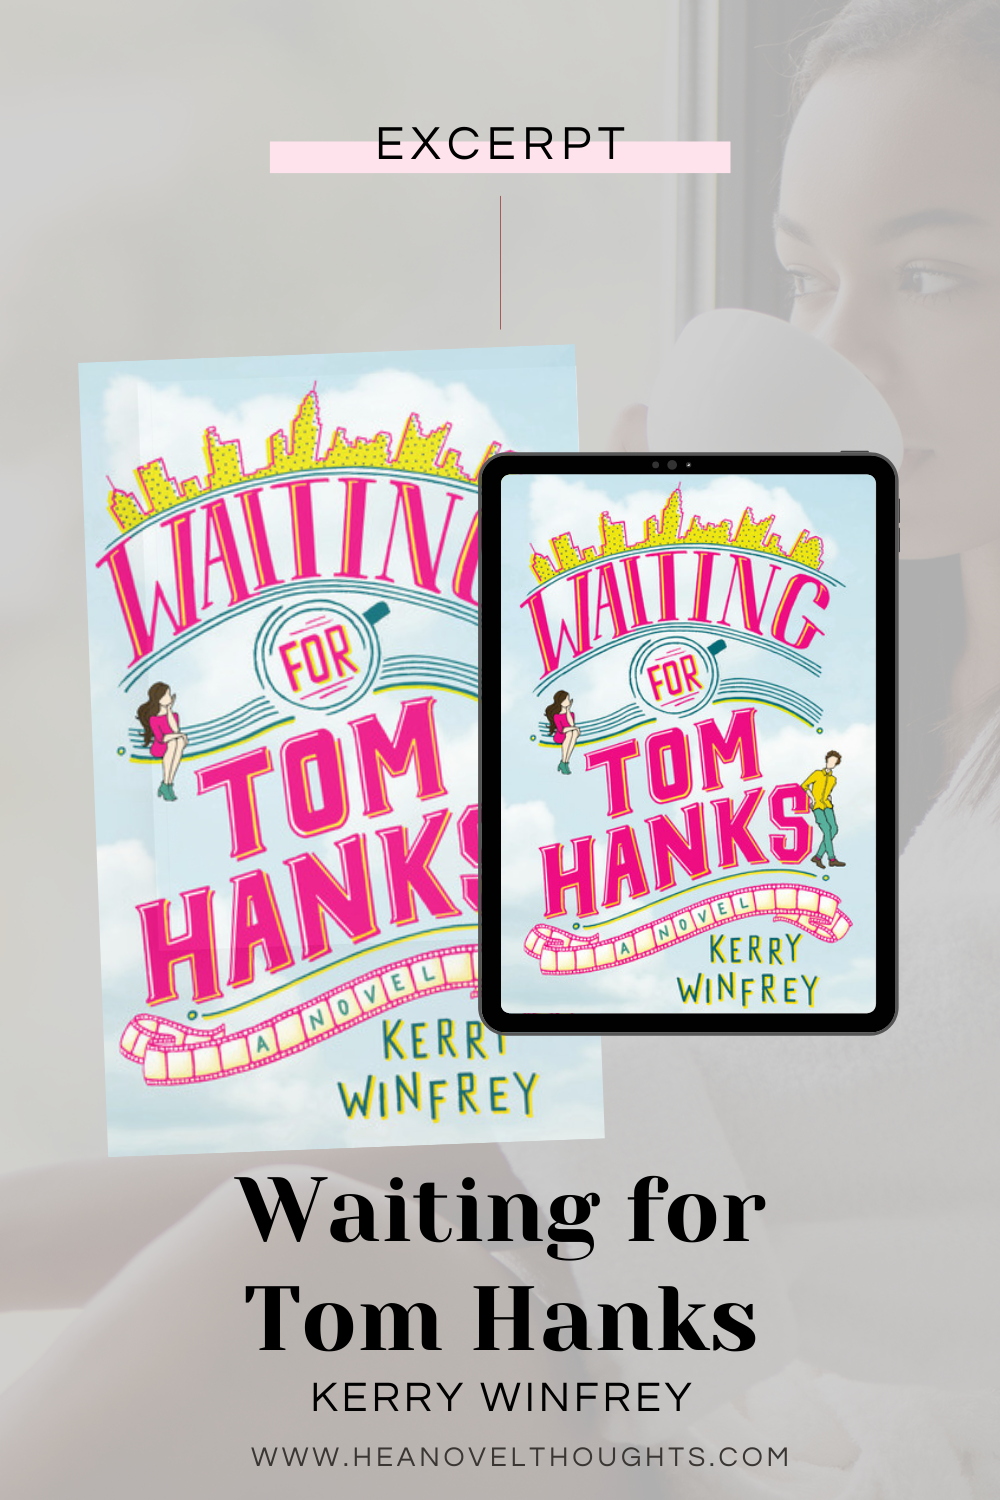 Excerpt of Waiting on Tom Hanks by Kerry Winfrey